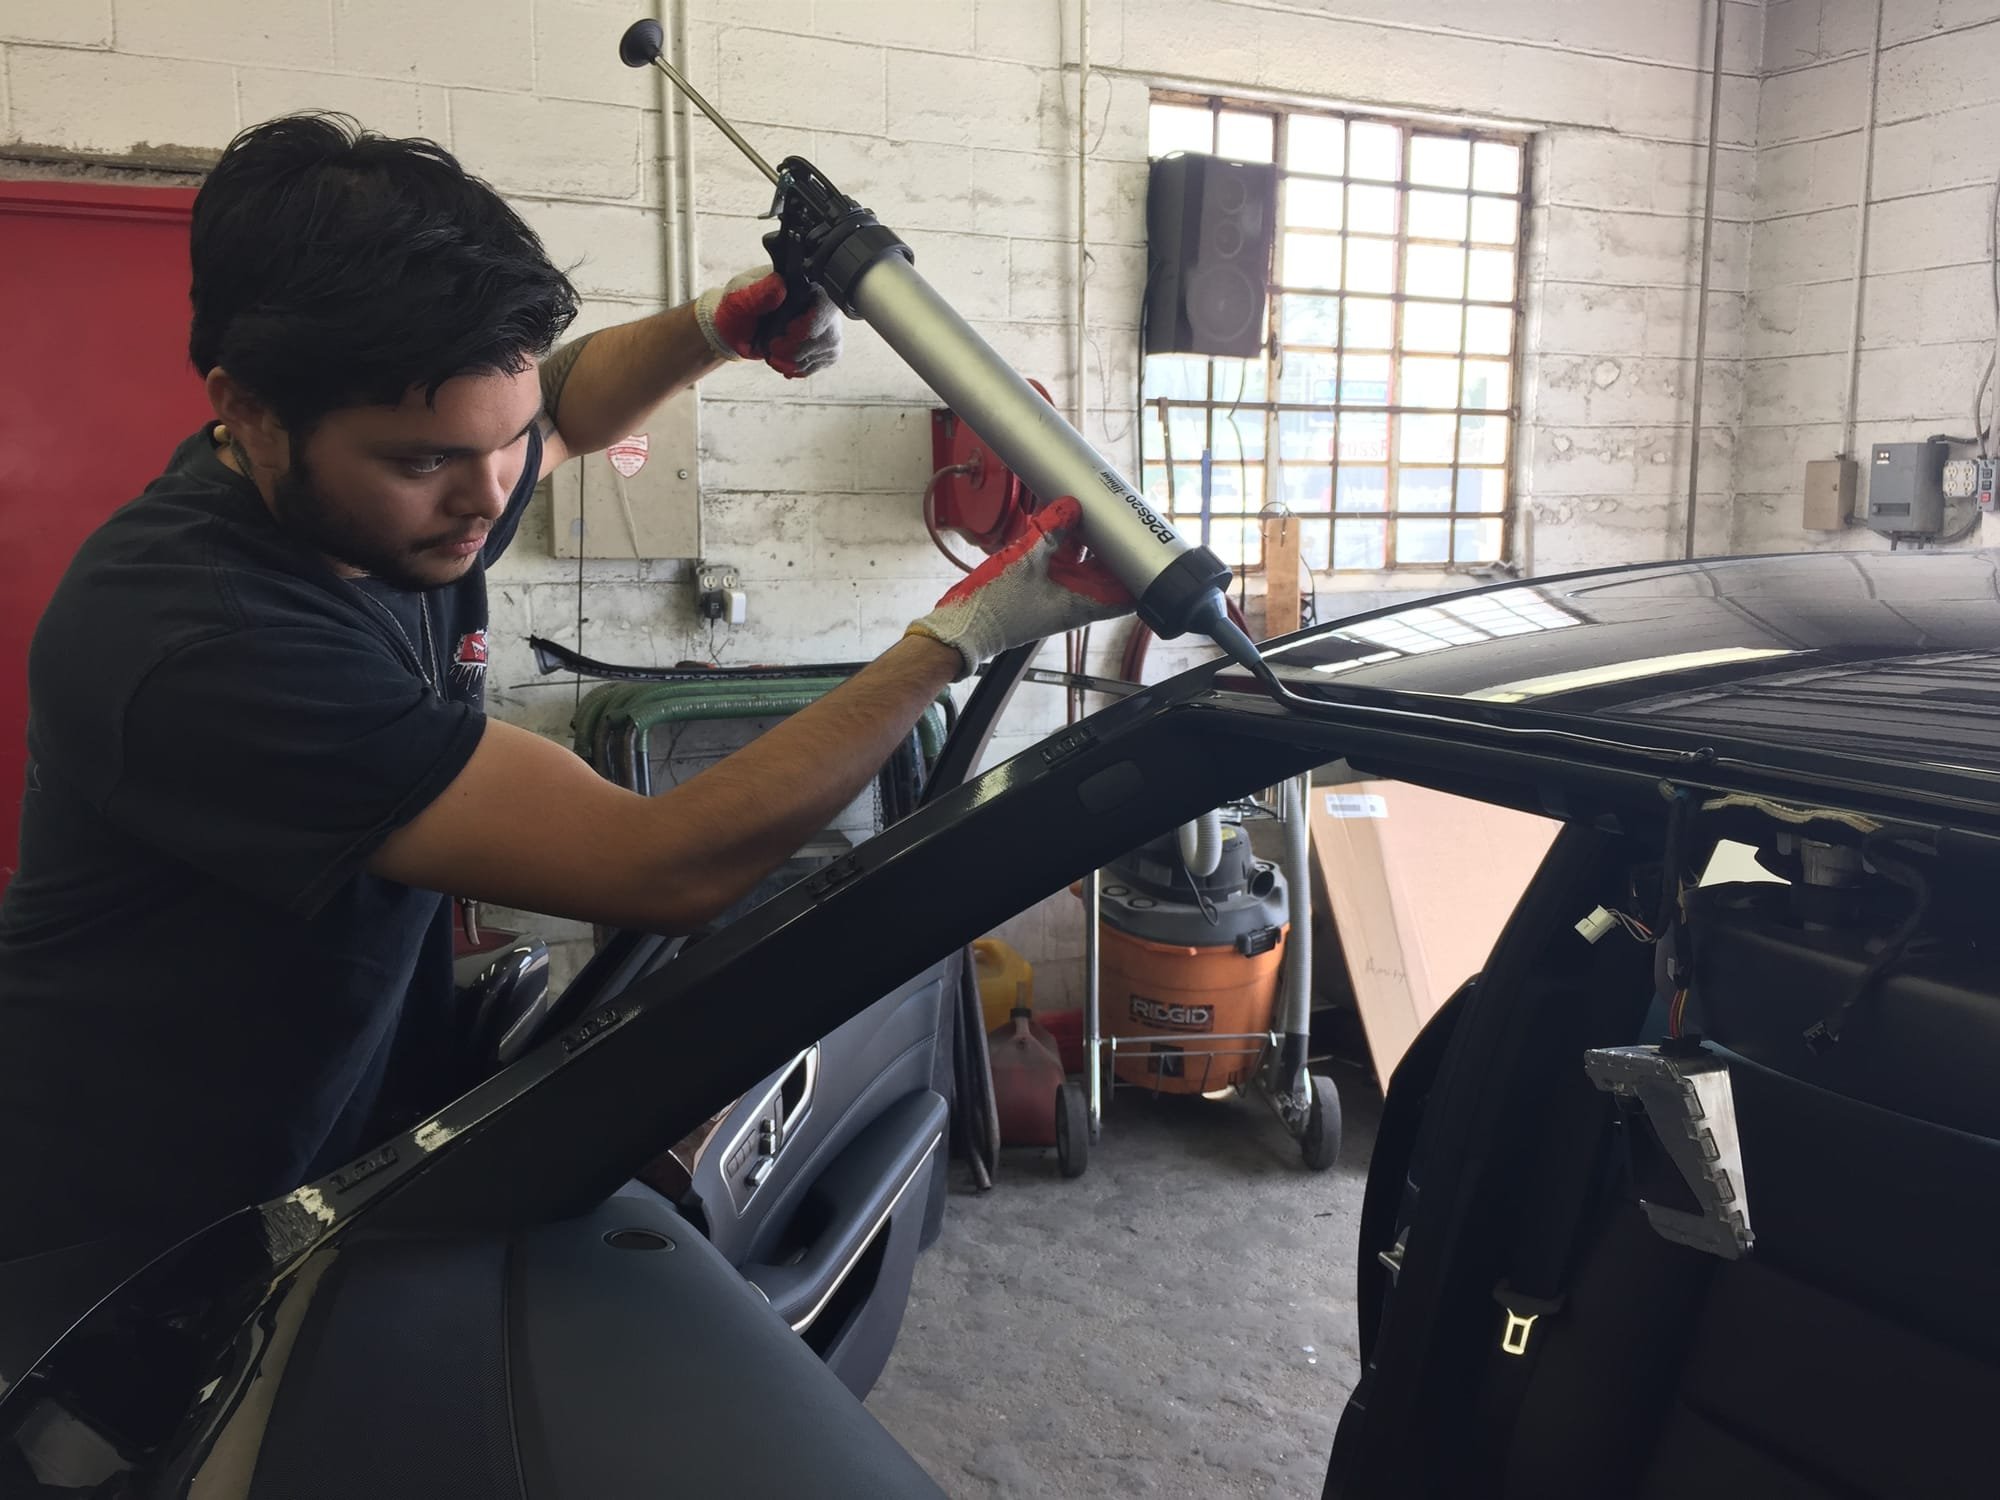 Get your Auto Glass Repairing done with most trusted Glass Installation center in New York